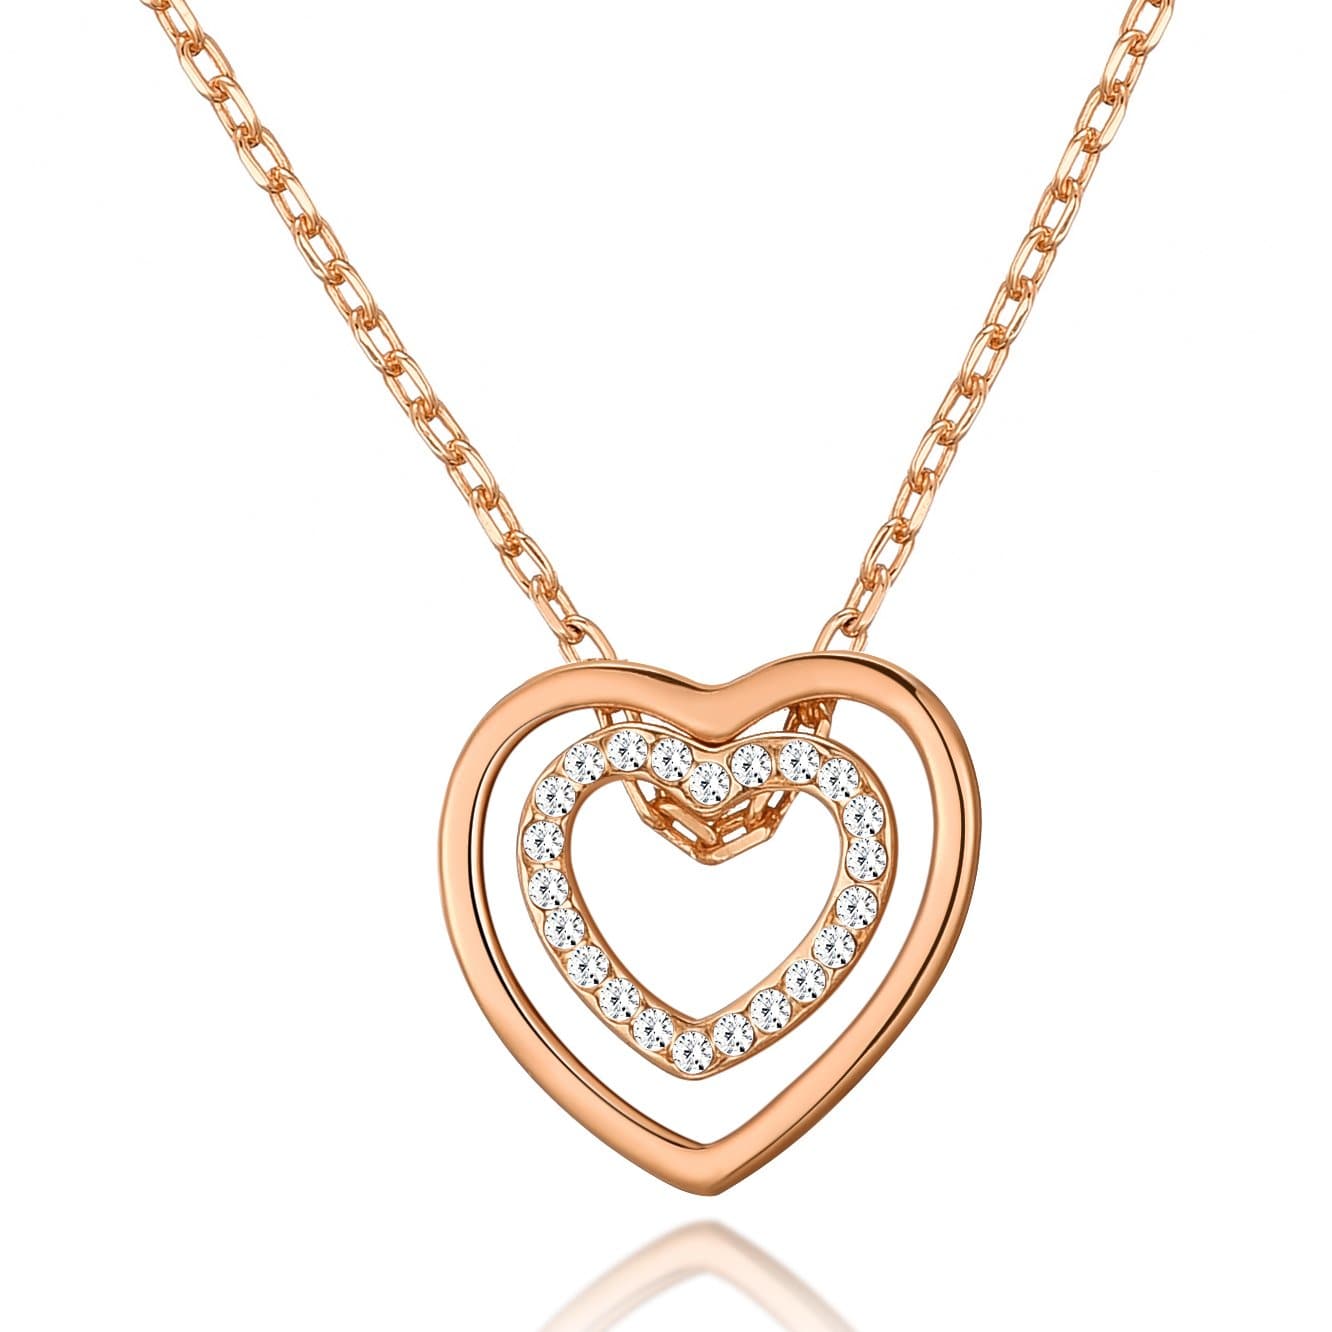 Custom Heart Sublimation Pendant - Iced Out Spin Necklace Rose Gold by Pearde Design